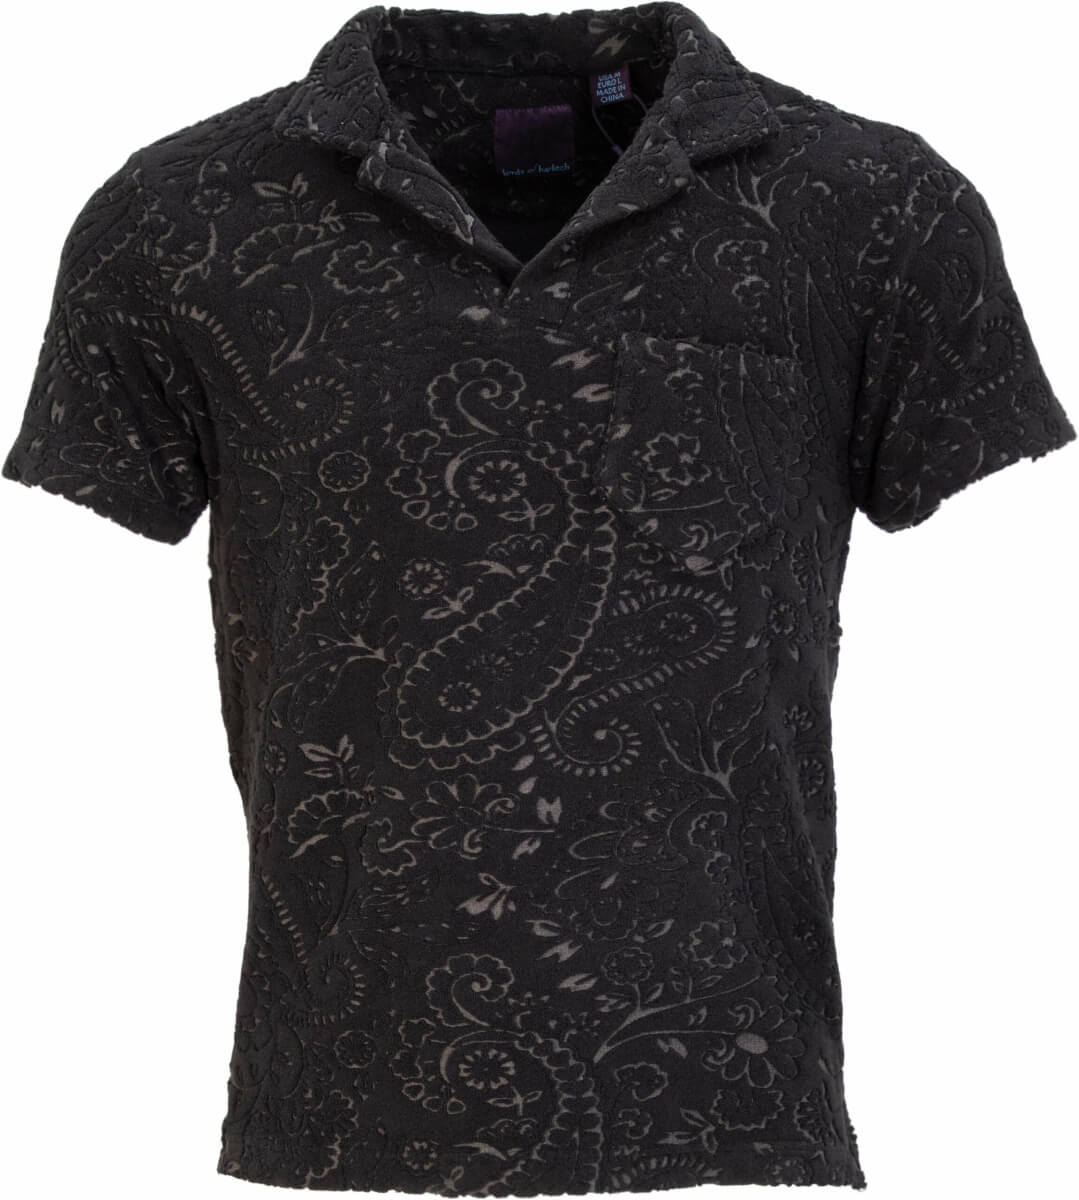 Men's Johnny Towel Paisley Polo Shirt In Black Small Lords of Harlech